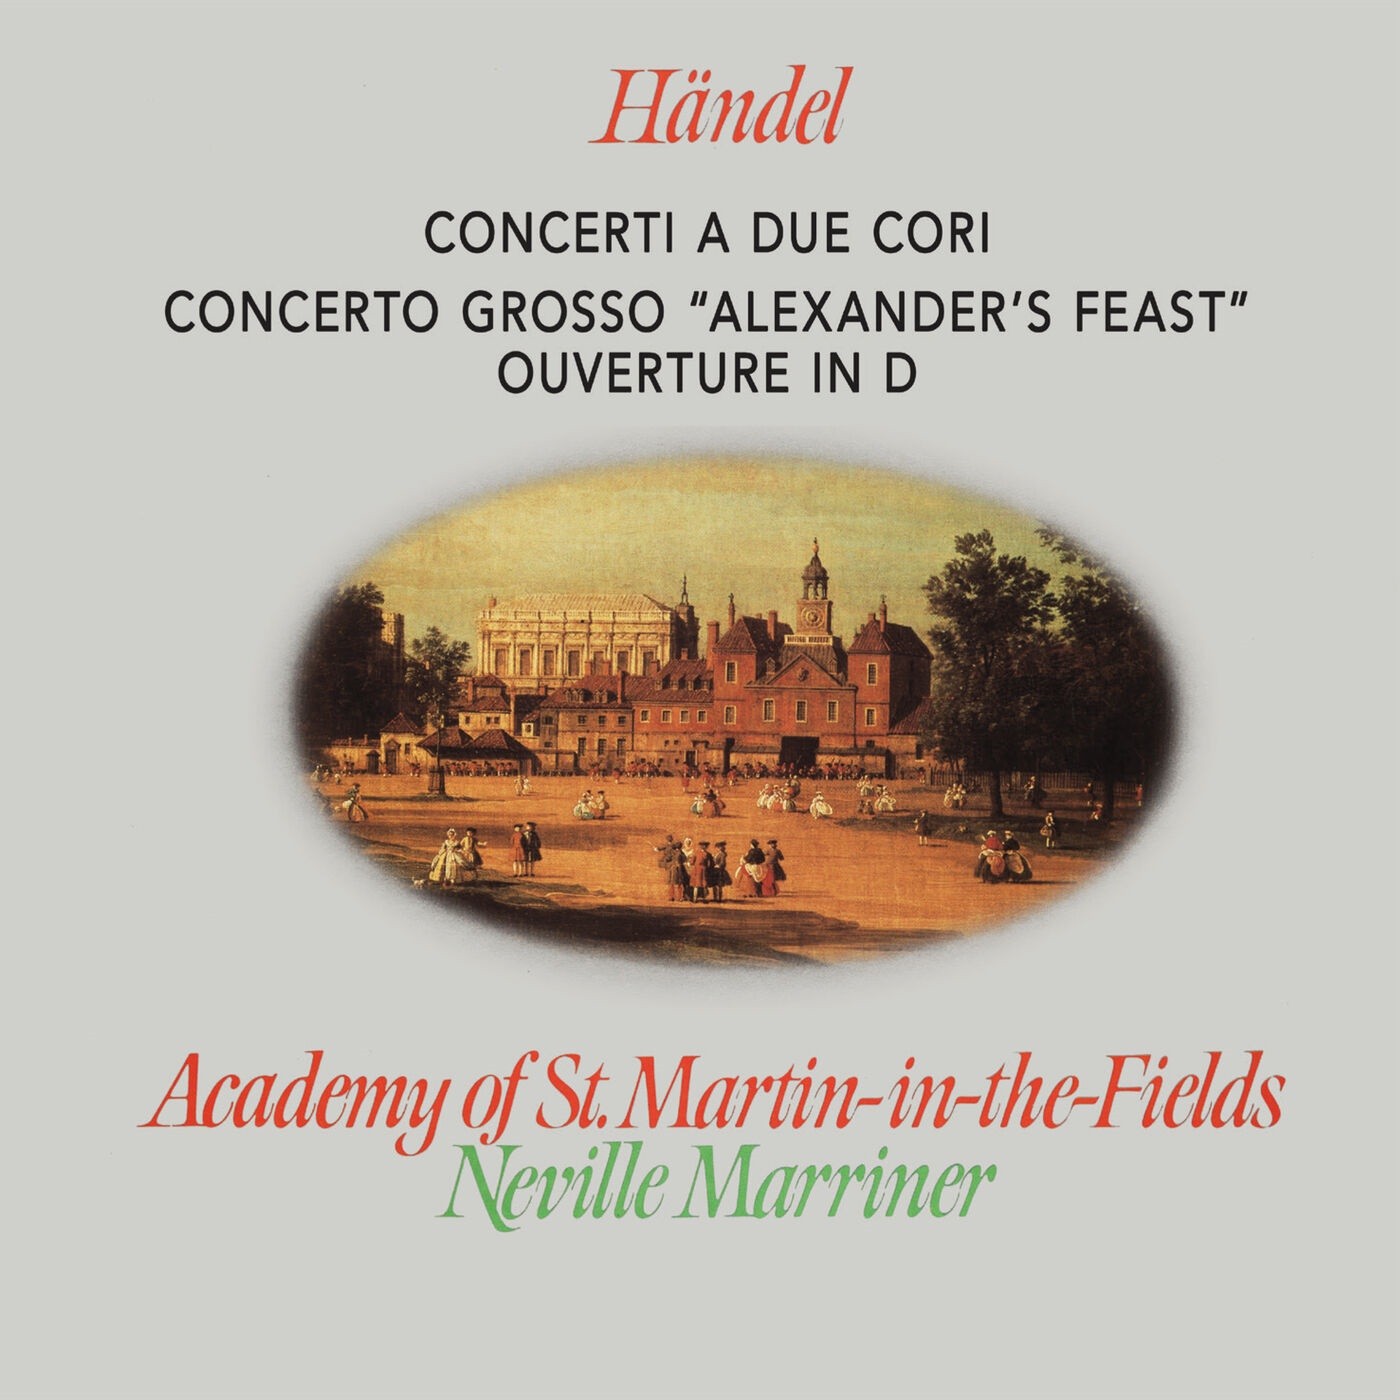 Academy of St. Martin in the Fields, Sir Neville Marriner - Handel: Concerti a due cori; Concerto Grosso "Alexander's Feast" (1978/2024) [FLAC 24bit/48kHz]